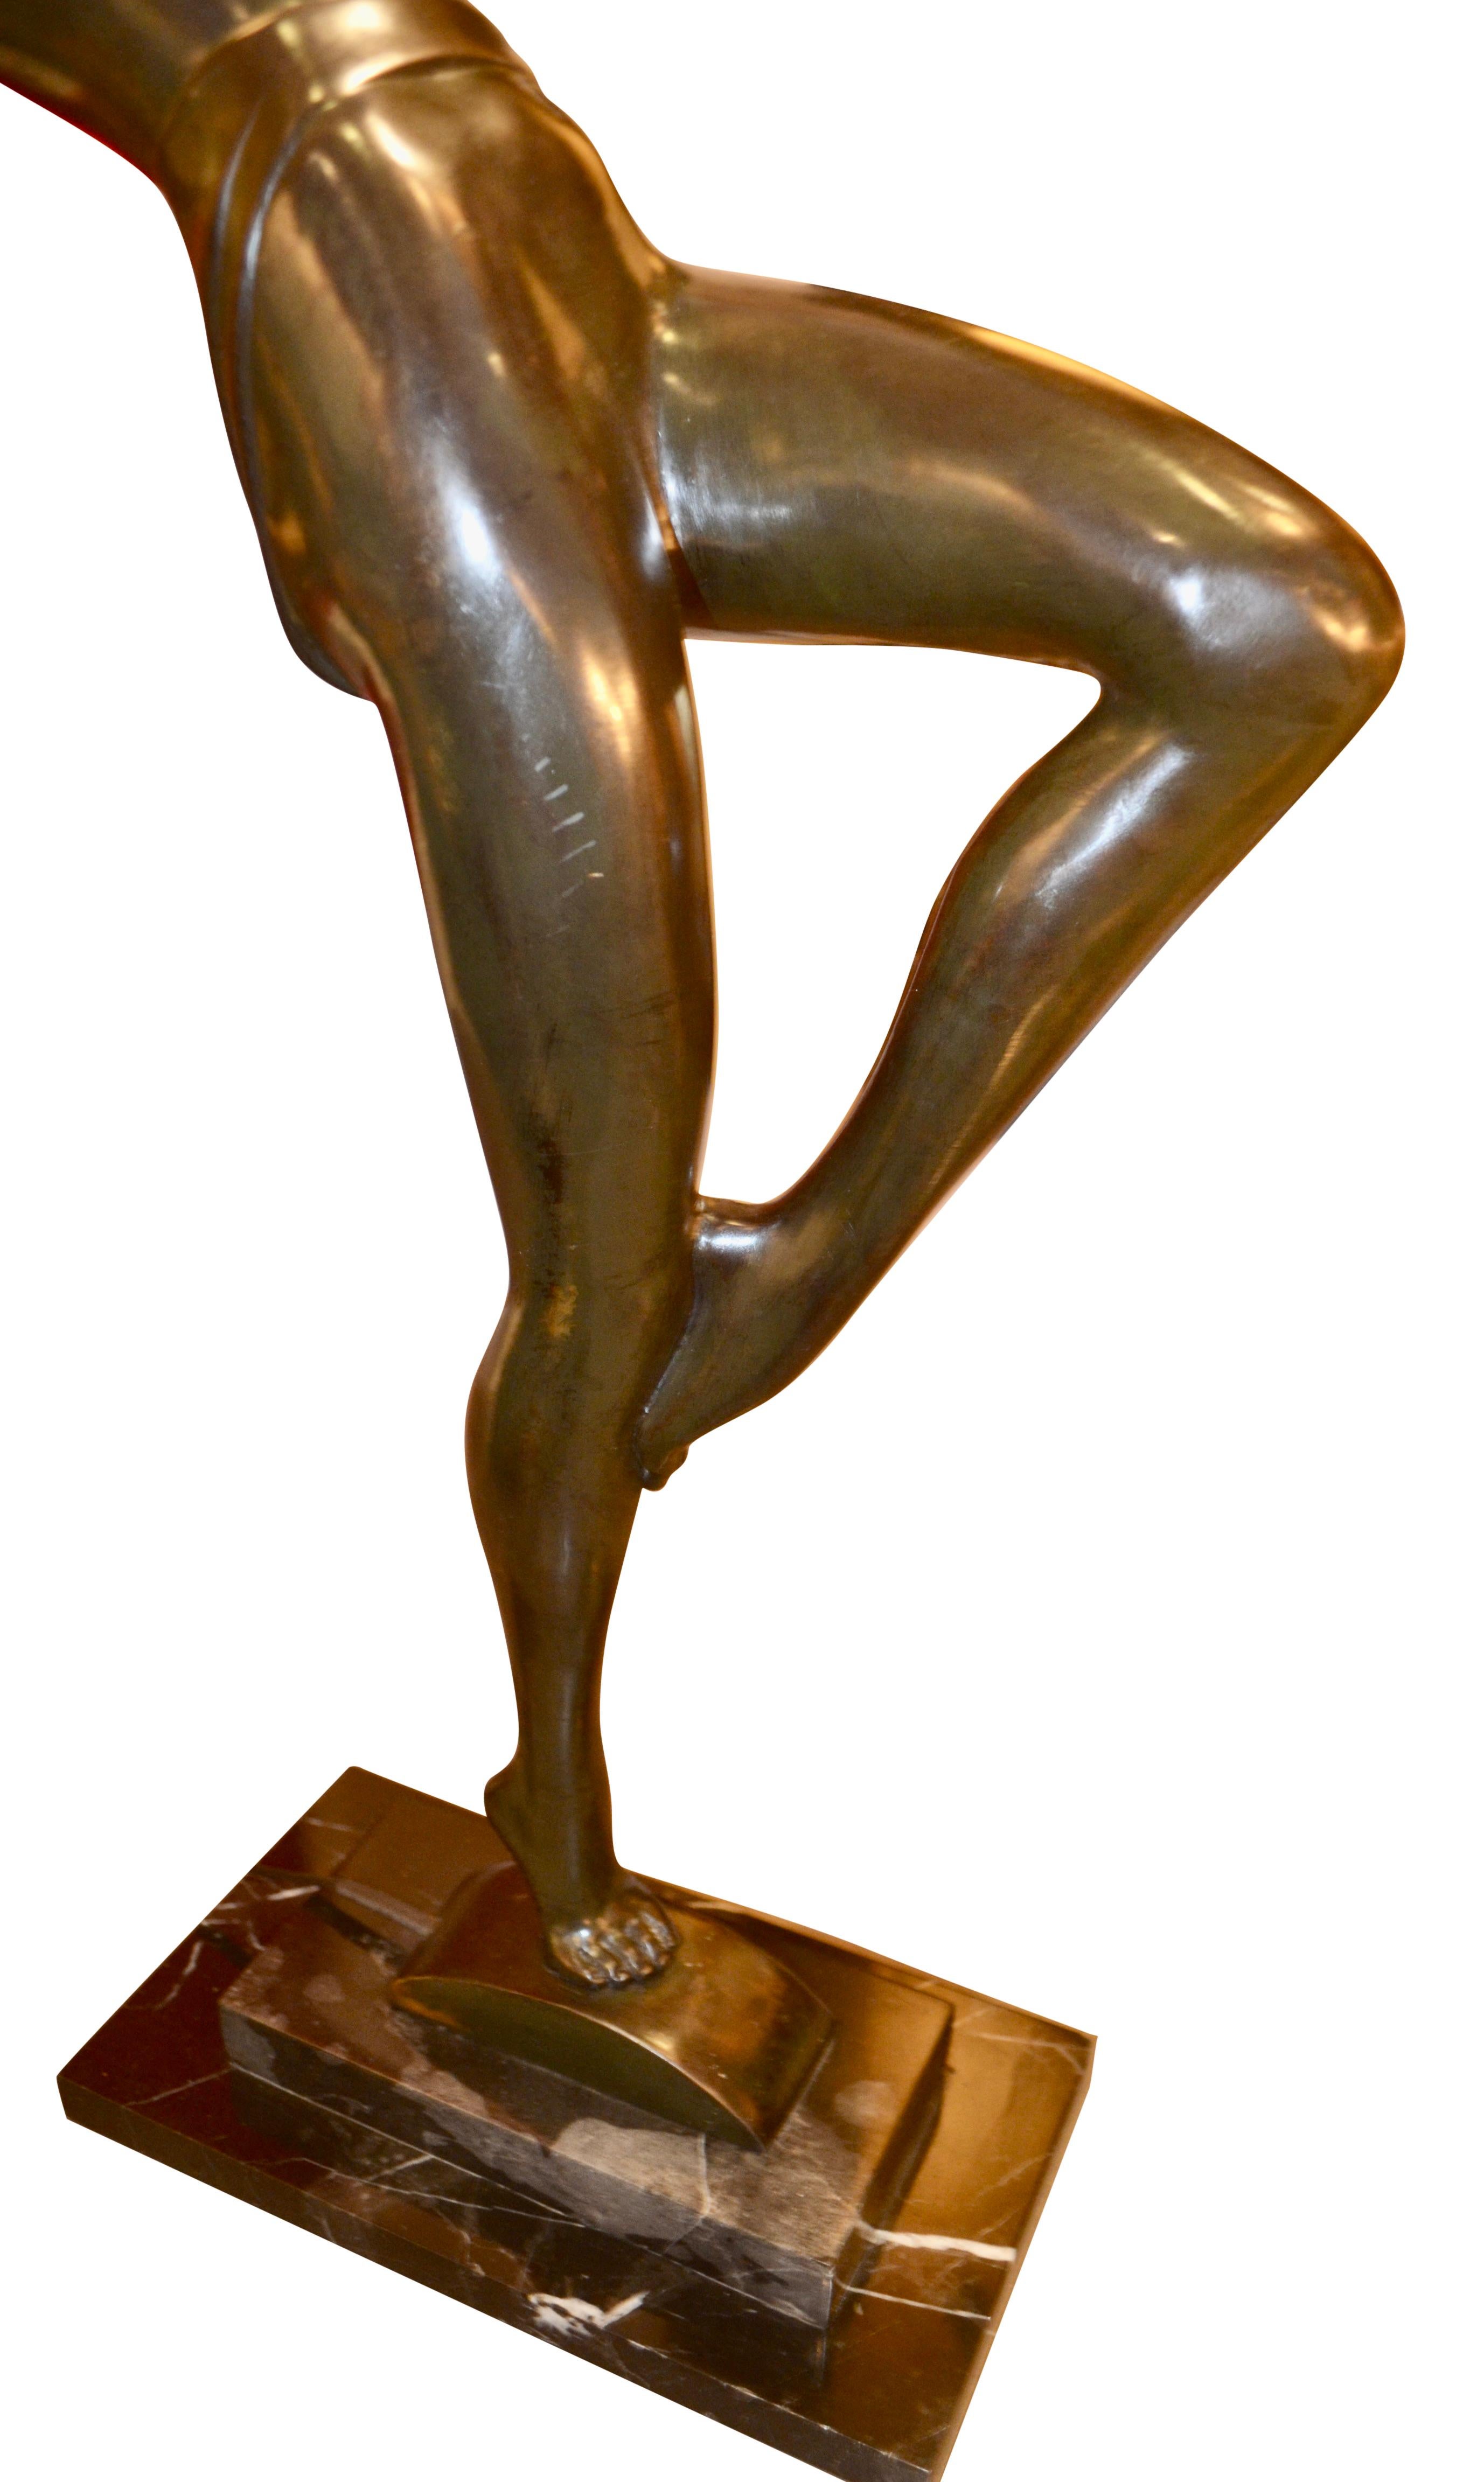    Patinated Bronze Art Deco Figurative Lamp with a Colored Glass Tulip Shade In Good Condition For Sale In Vancouver, British Columbia